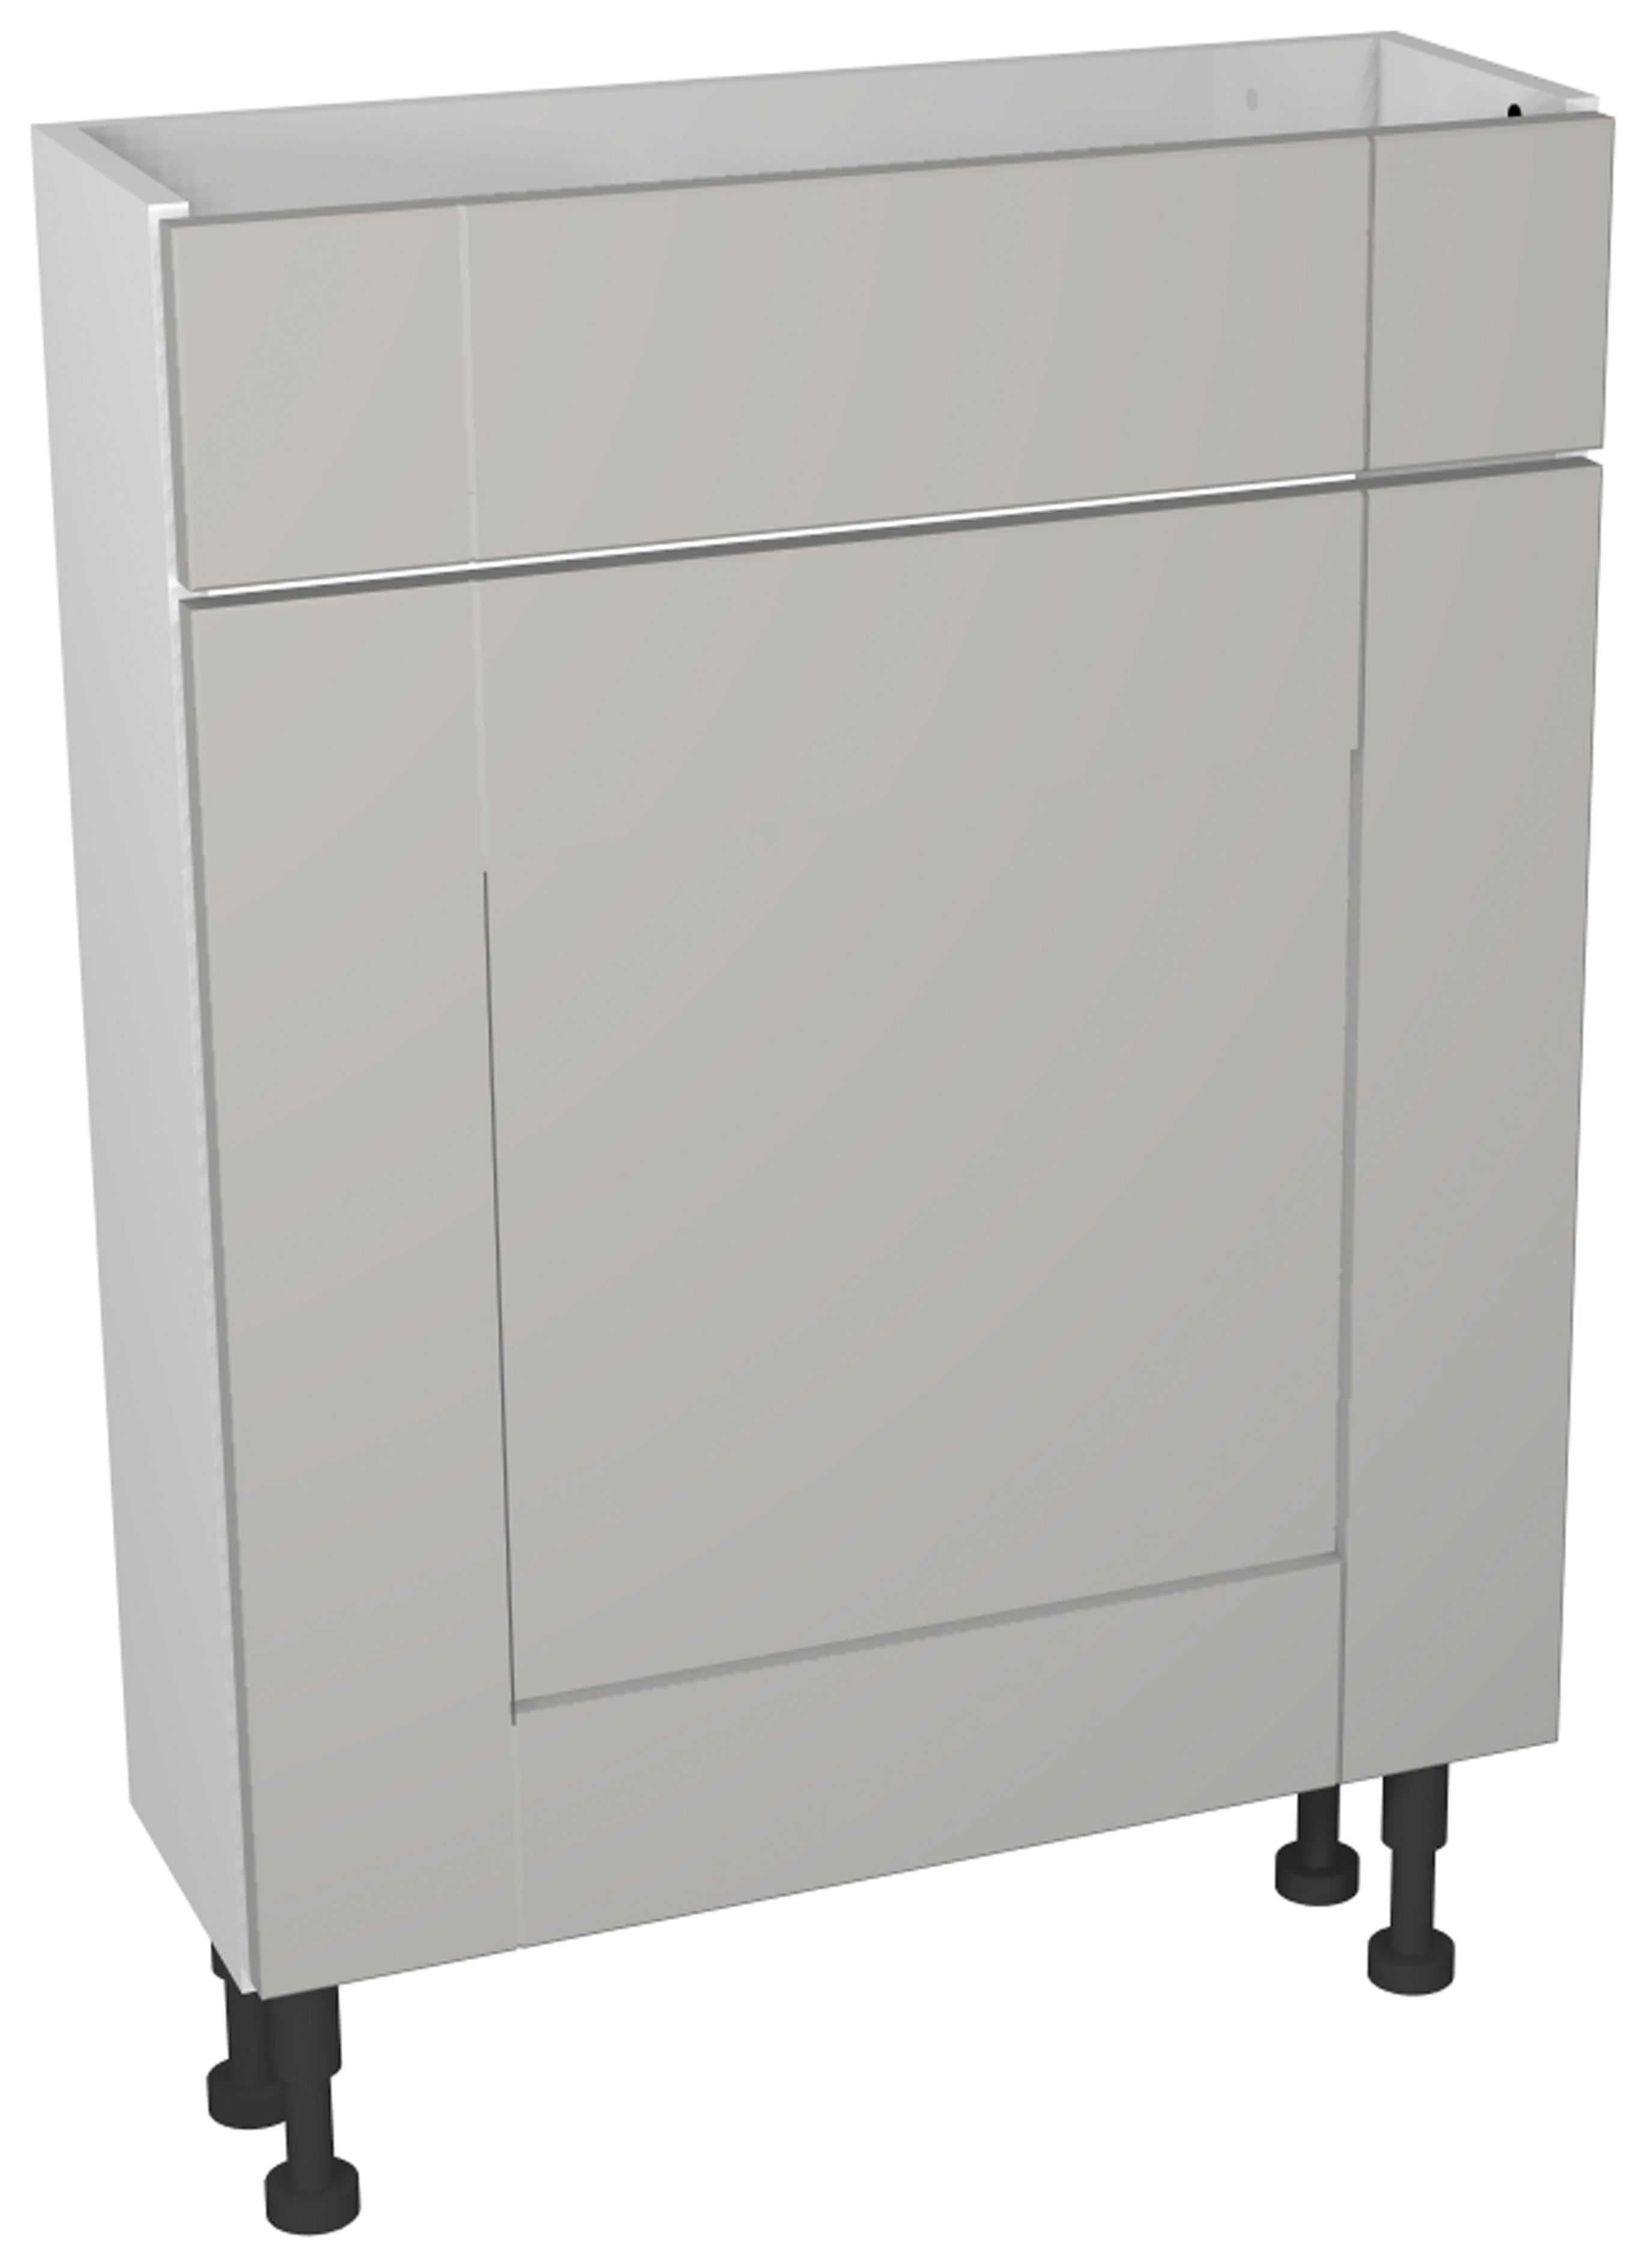 Image of Wickes Vermont Grey Compact WC Unit - 600 x 735mm